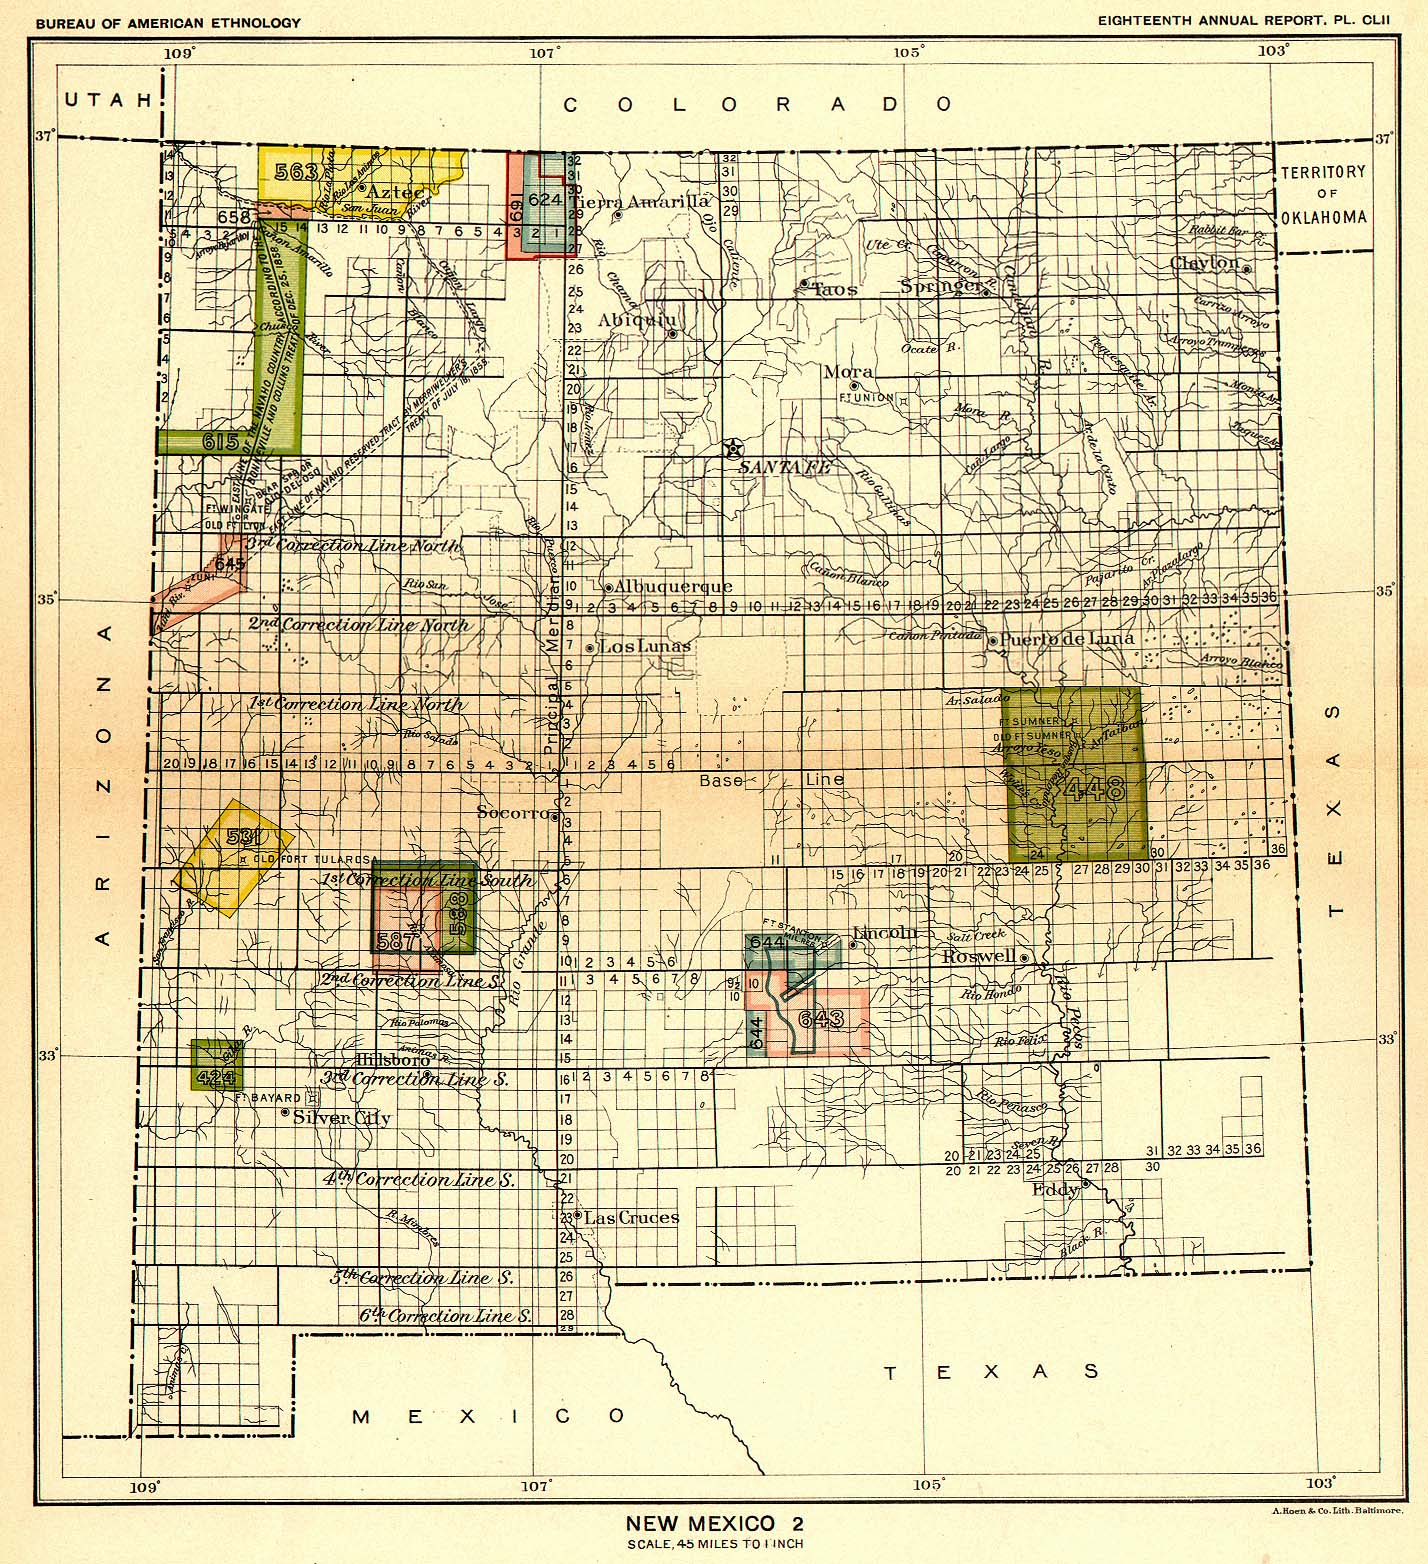 New Mexico 2, Map 45